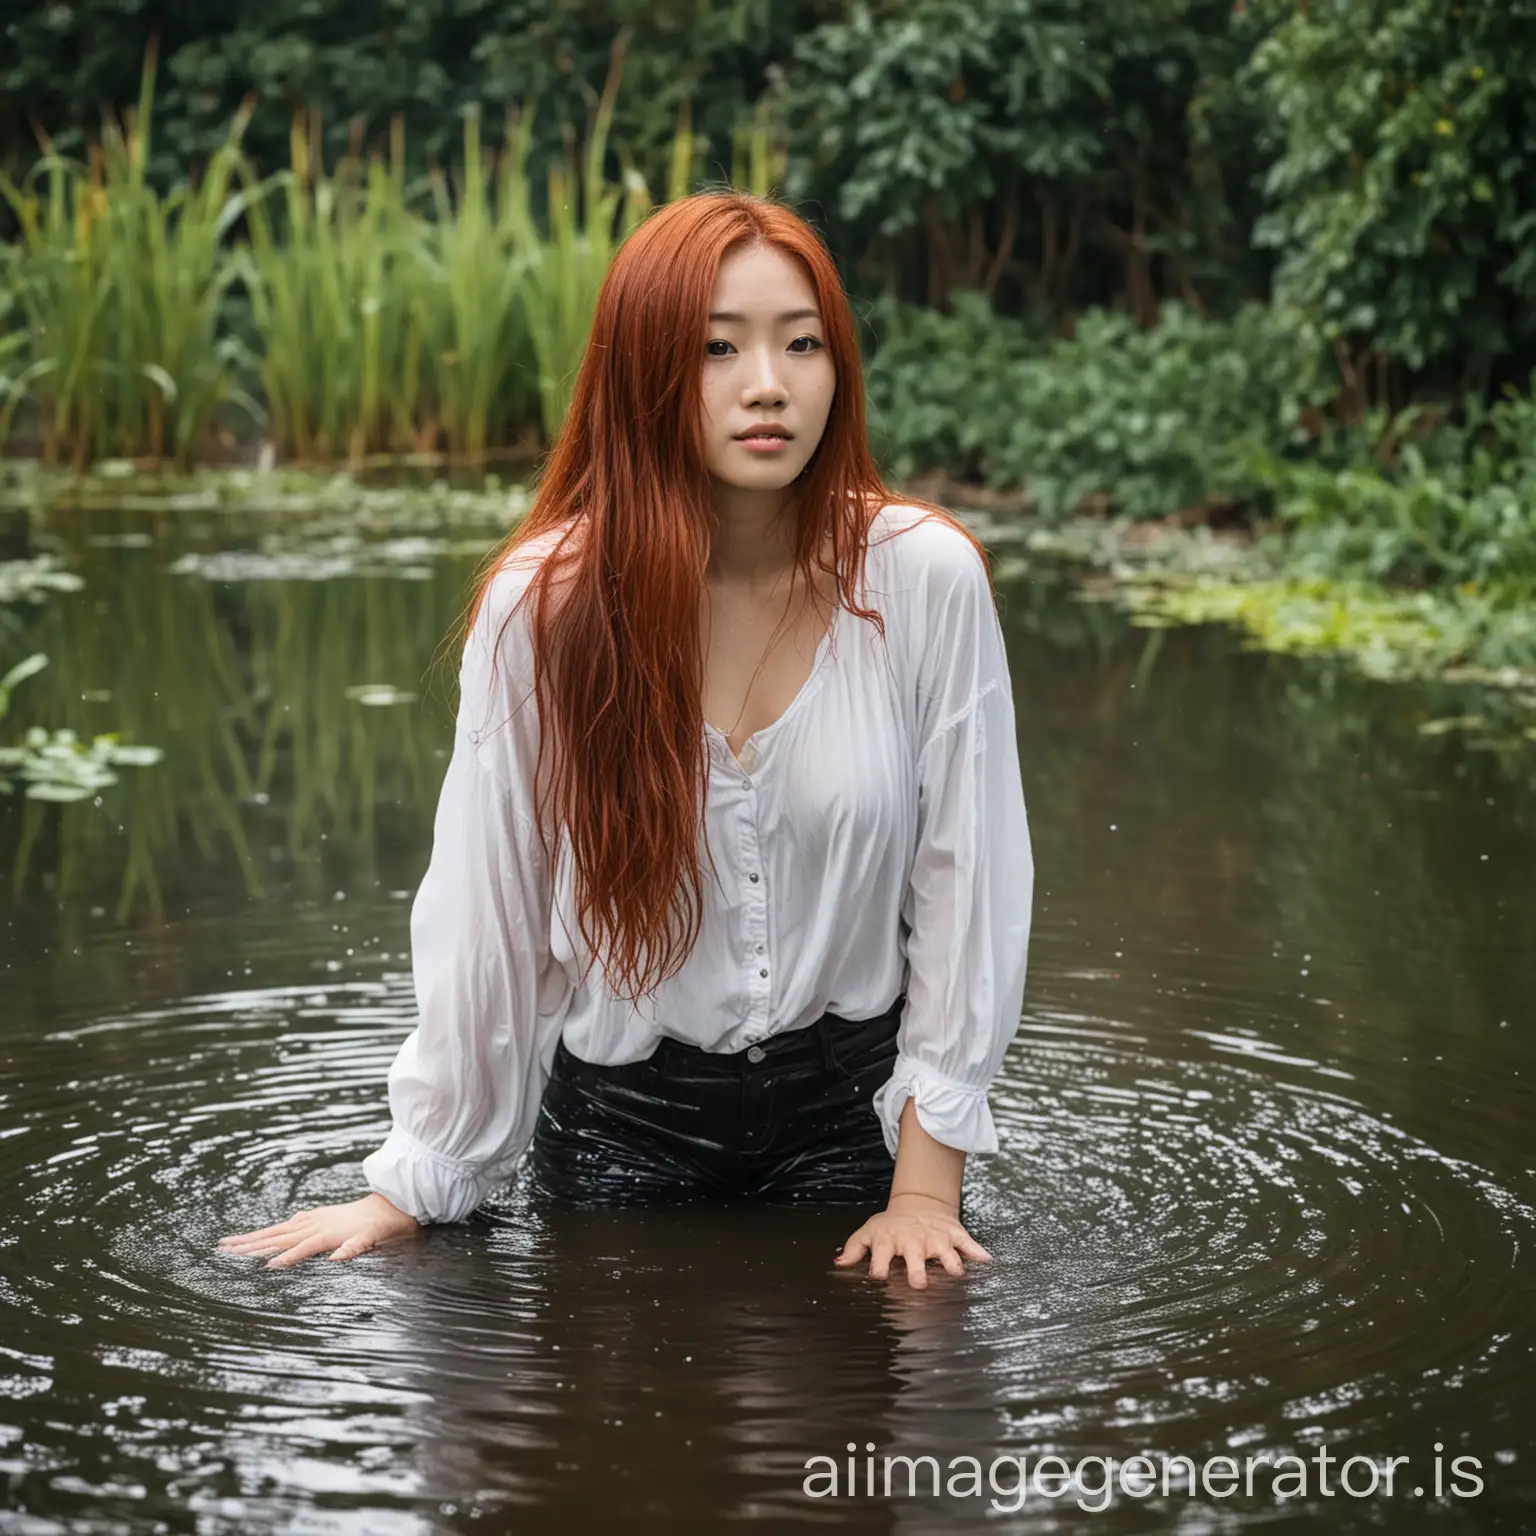 A young Asian woman with long red hair wearing a white top standing in a pond ,she is completely soaking Wet